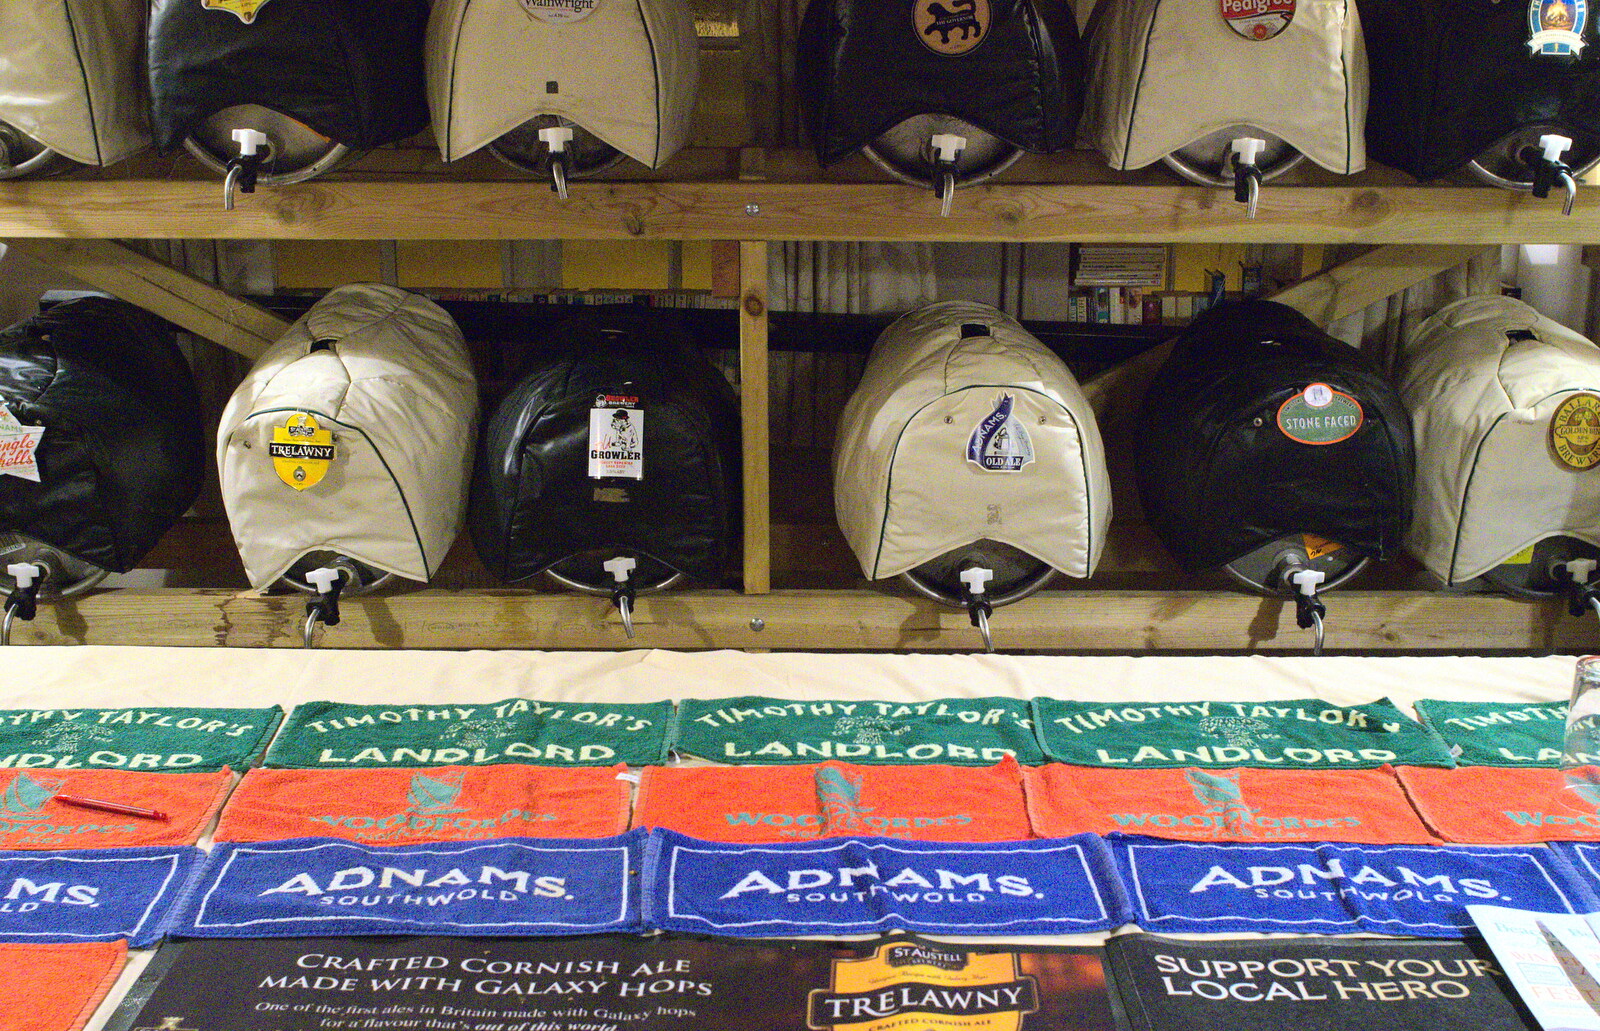 Beer mats and barrels from The Beaconsfield Arms Beer Festival, and a Rainy Day, Diss and Occold - 30th November 2012